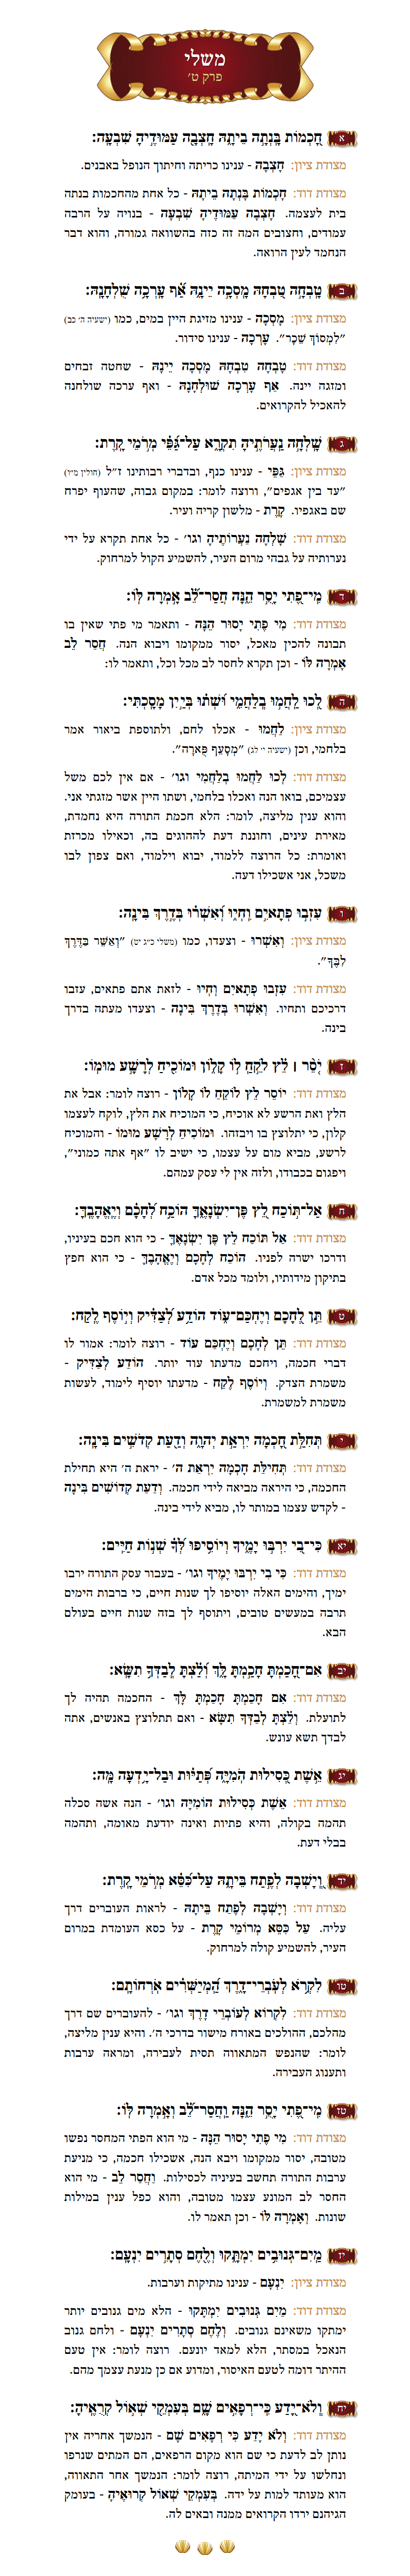 Sefer Mishlei Chapter 9 with commentary